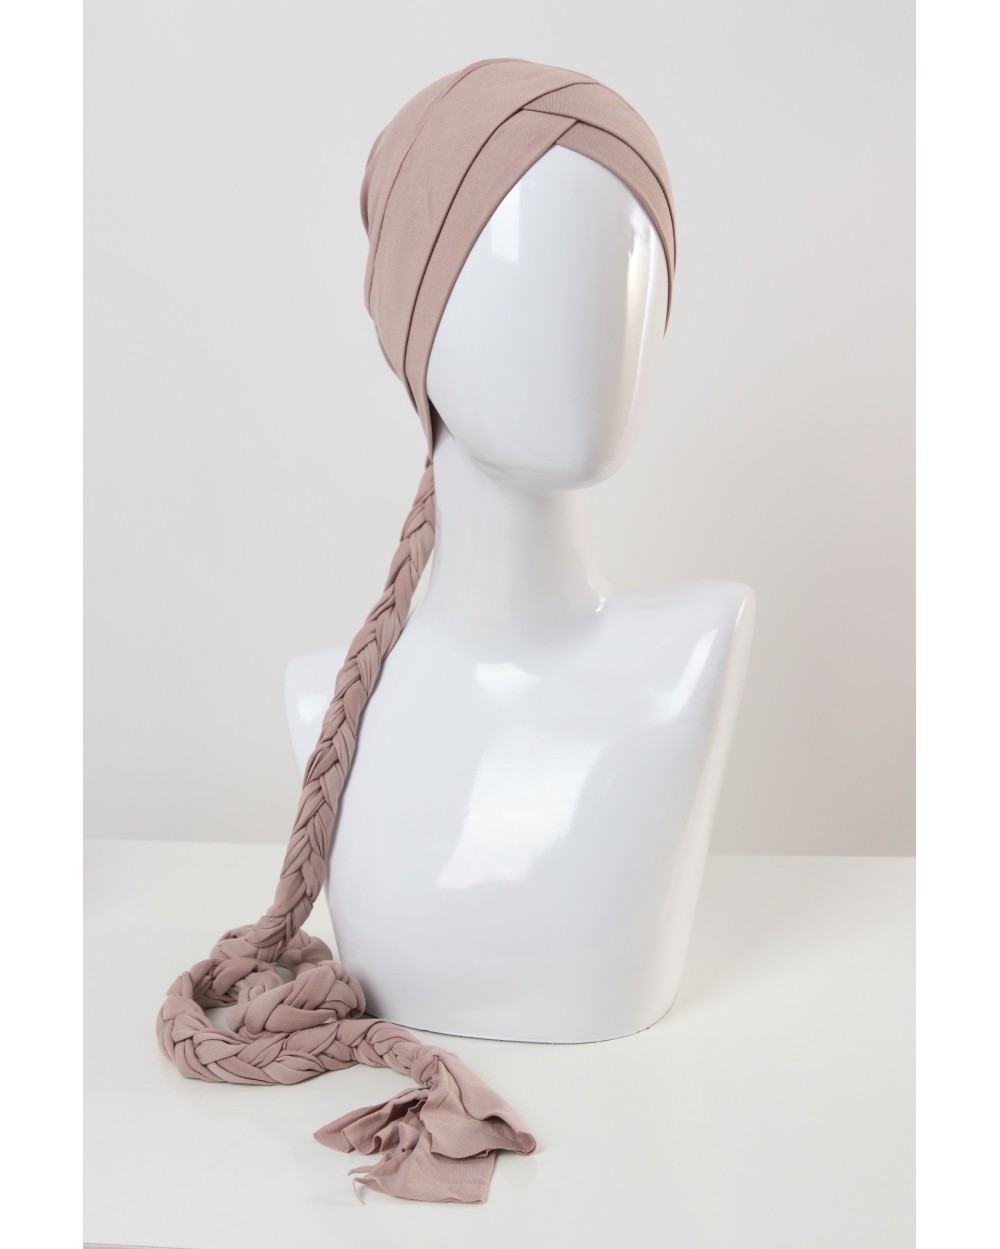 Double-breasted plain knotted turban with mat